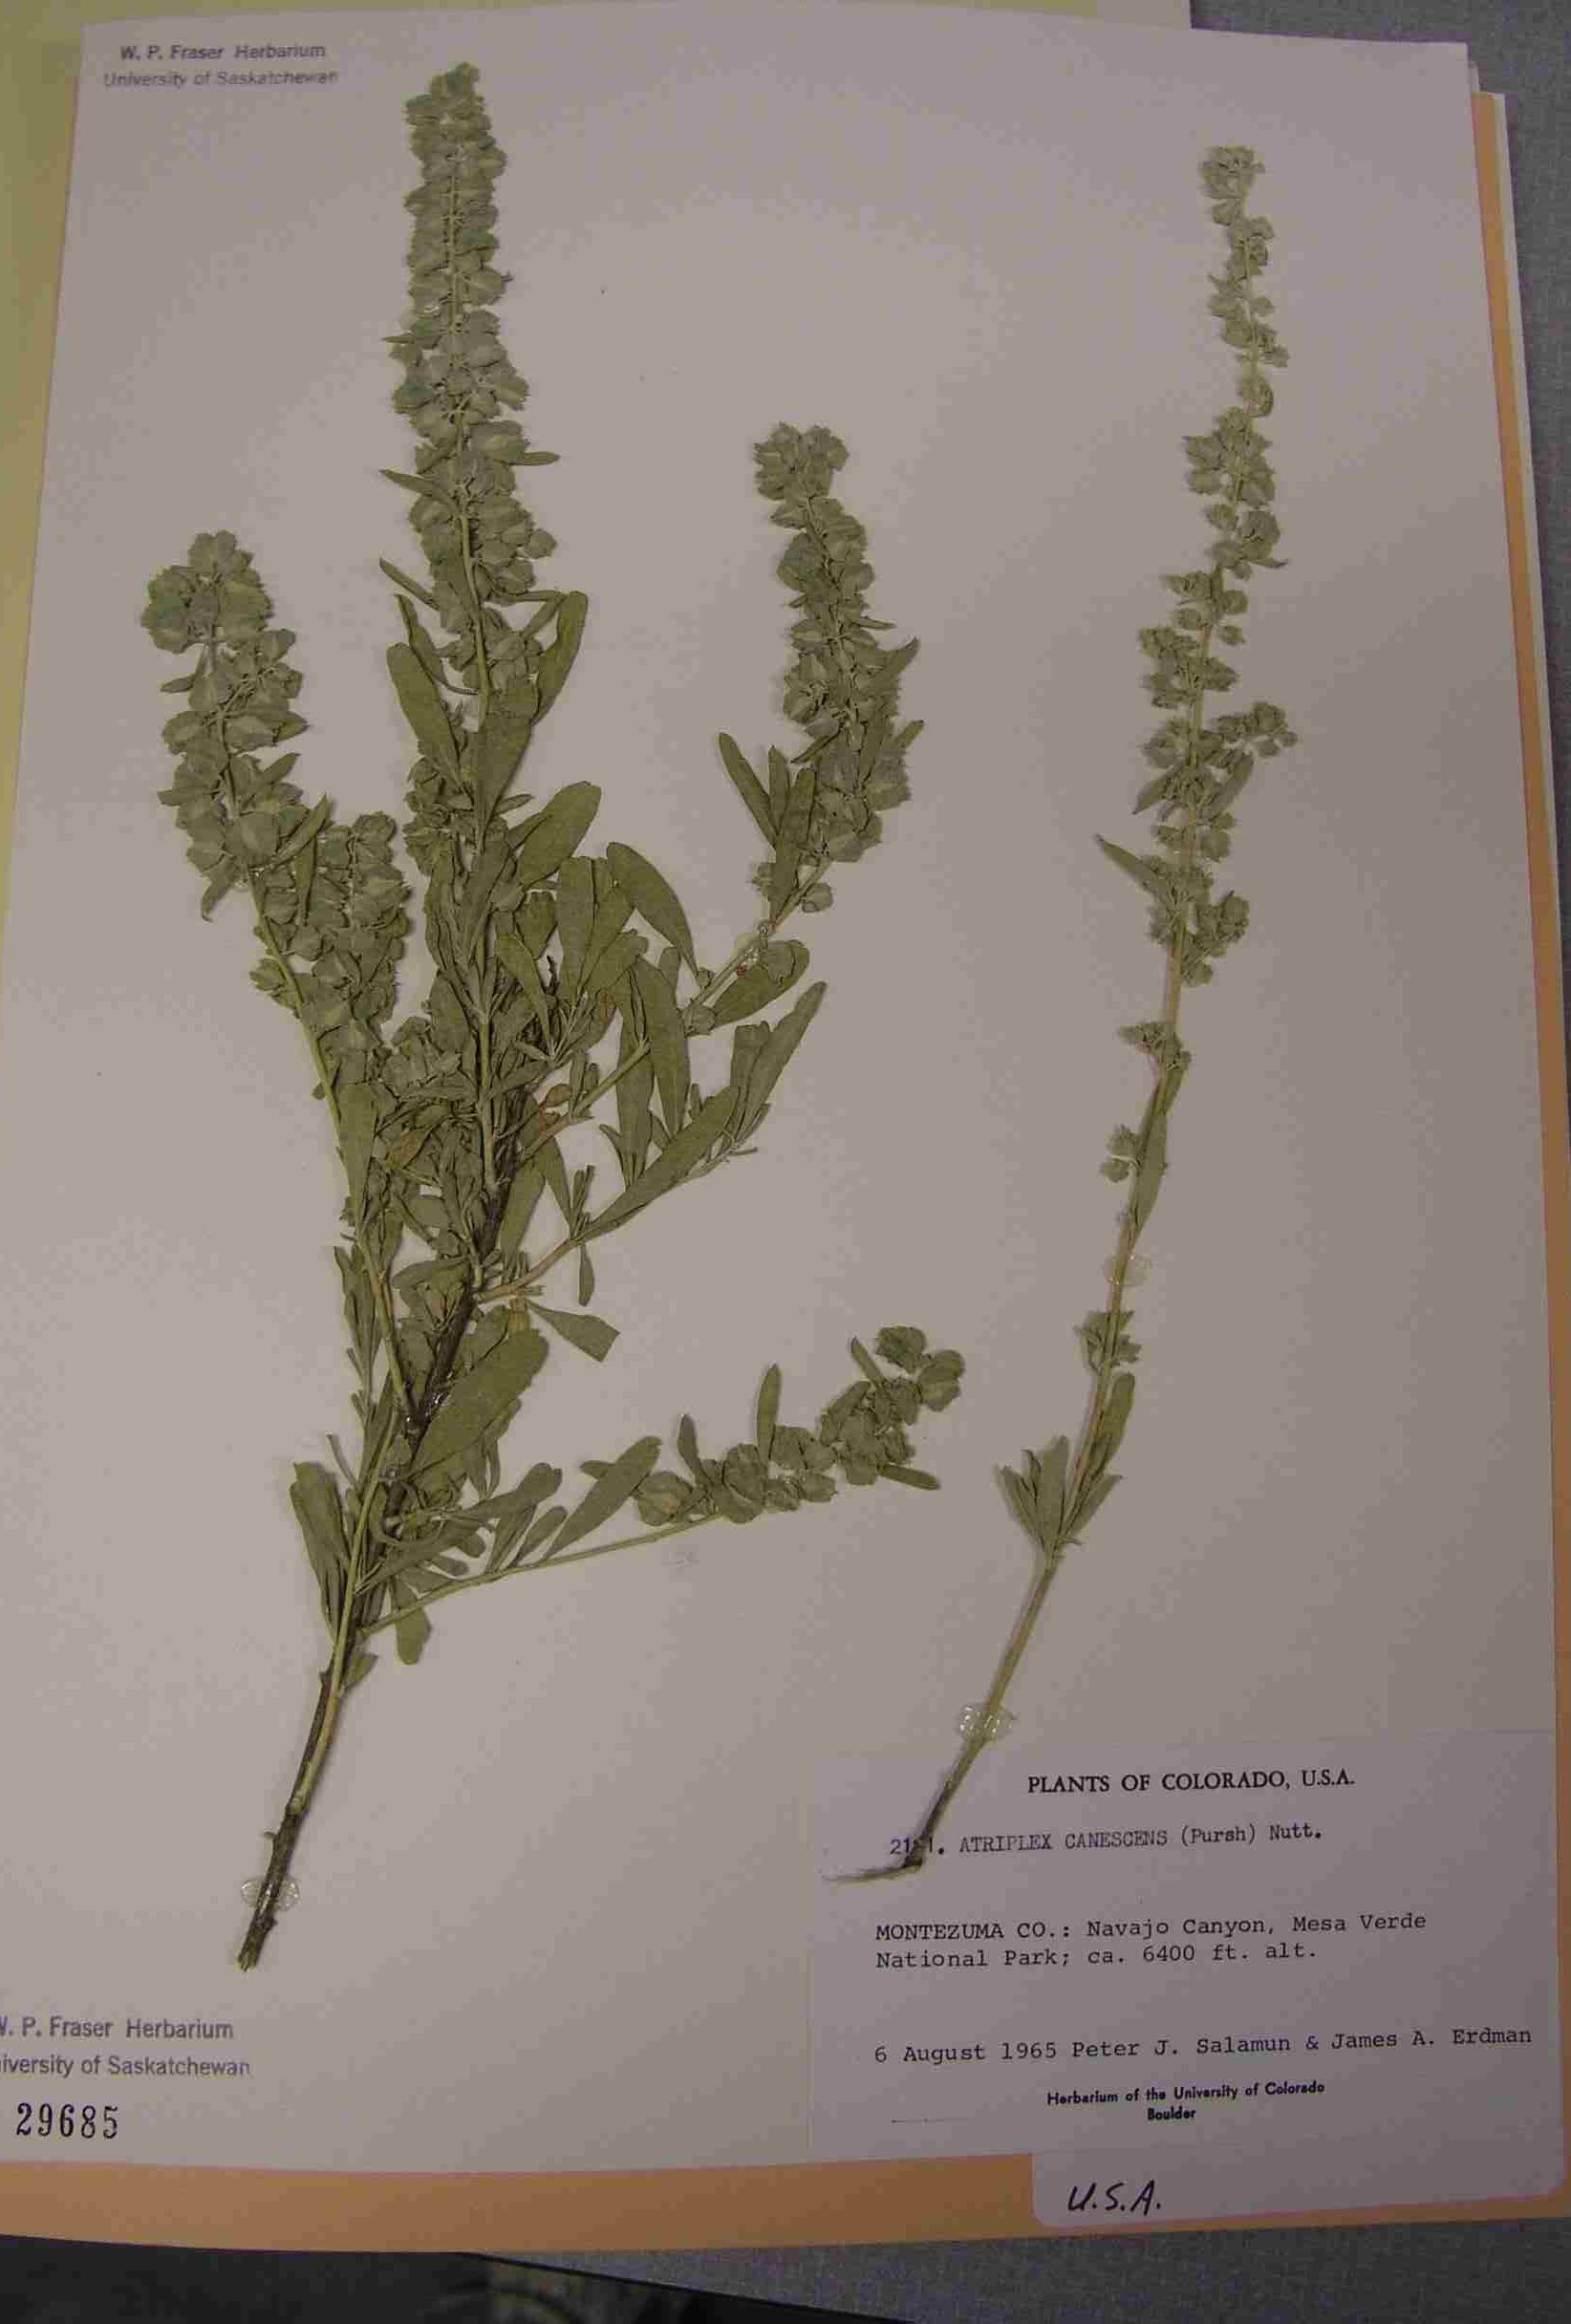 Two pressed and preserved branches of Four-wing Saltbush. The two branches are laid falt on a large sheet of white paper, with specimen details typed at the bottom.